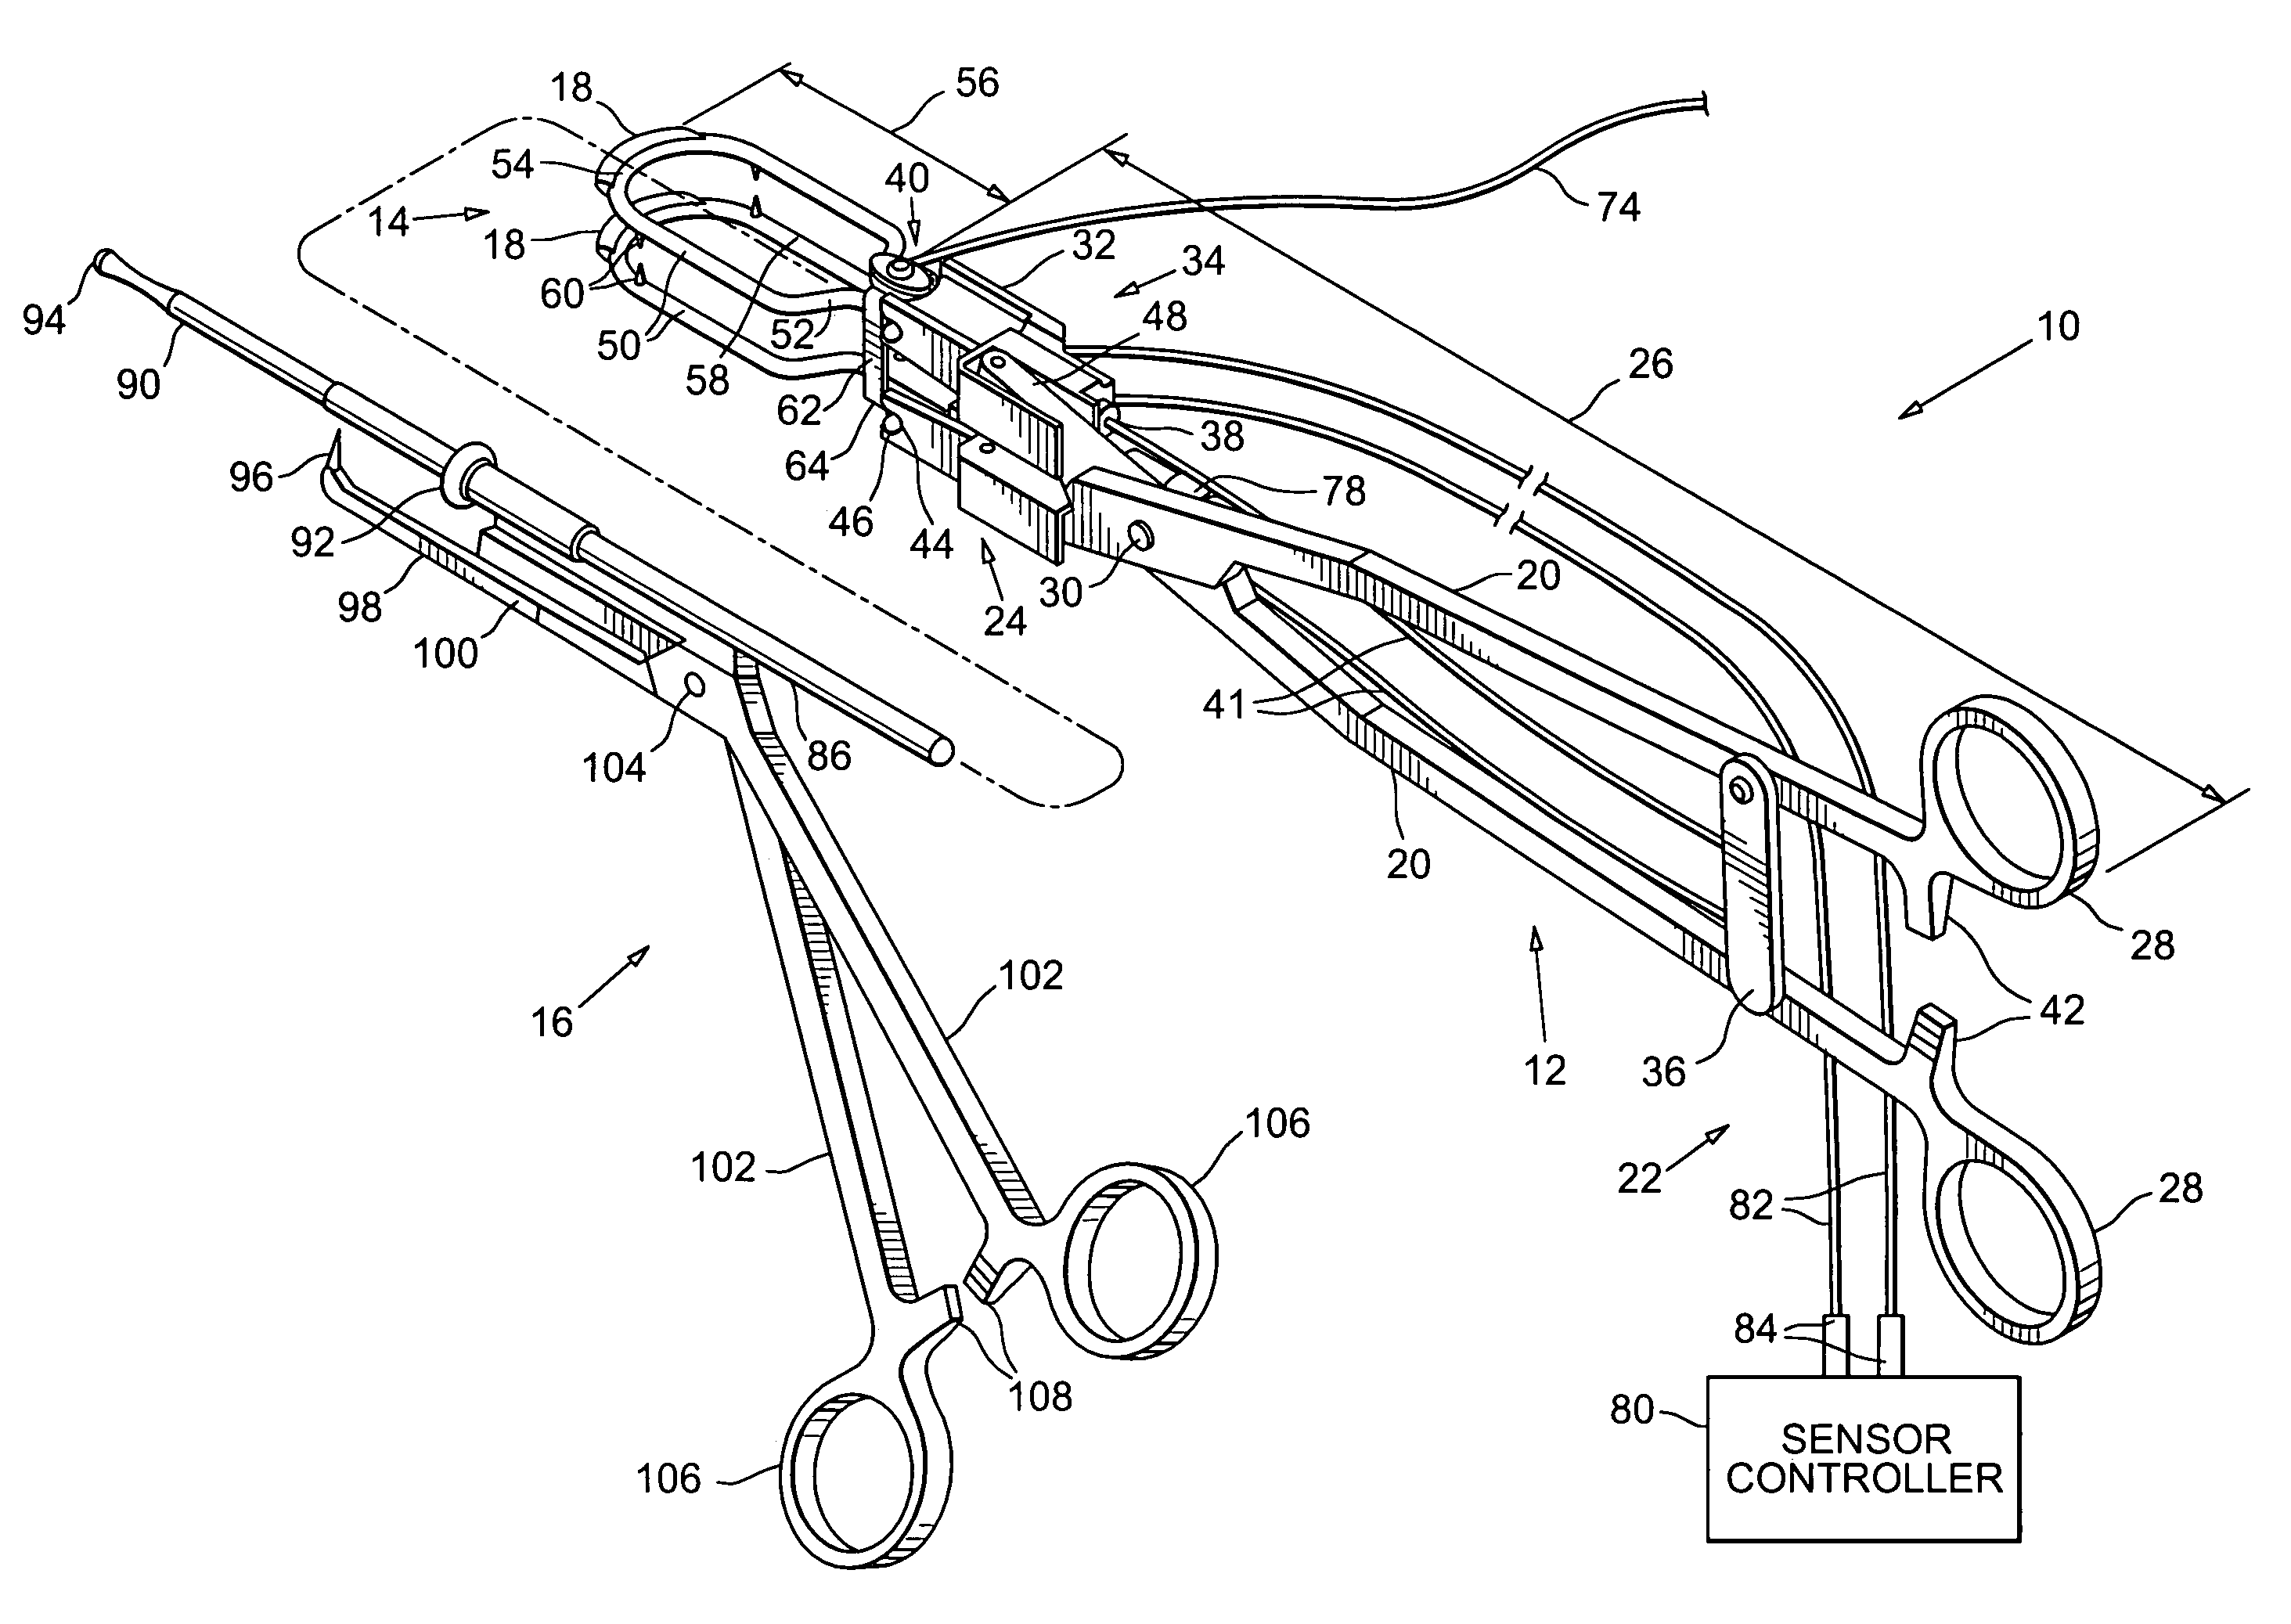 Occlusion device with deployable paddles for detection and occlusion of blood vessels